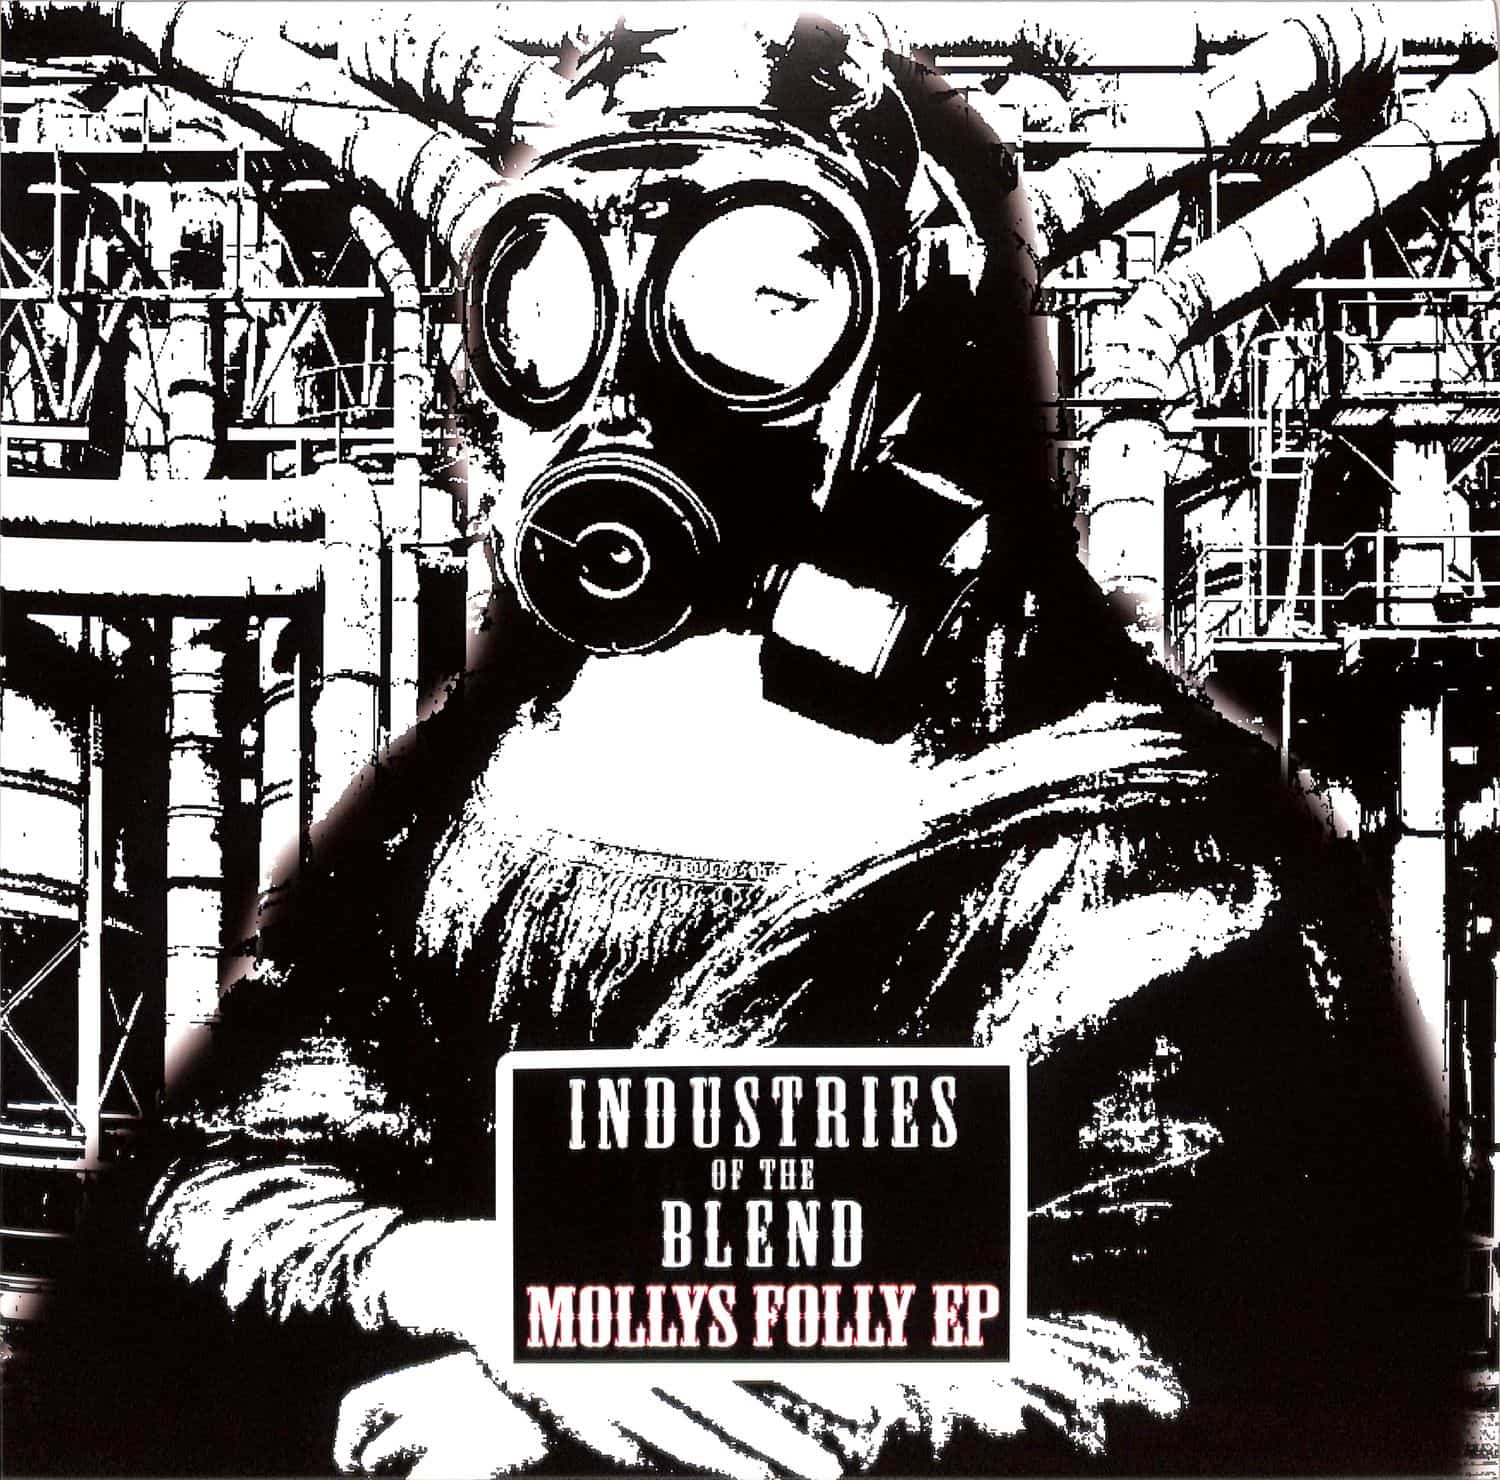 Industries Of The Blend - THE FOLLY OF MOLLY EP